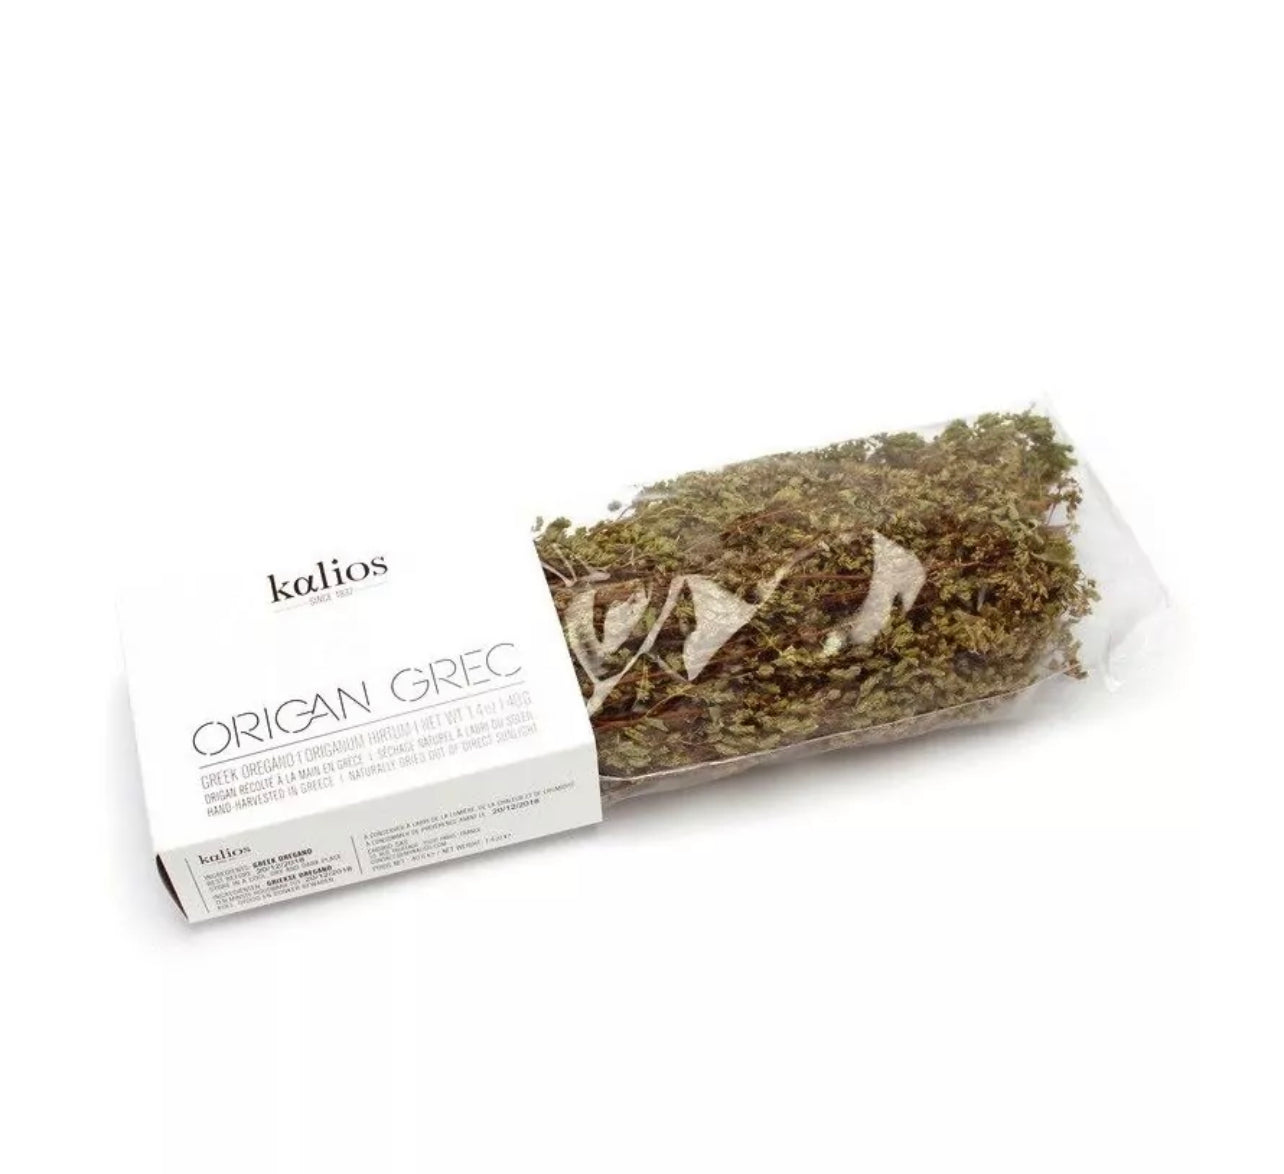 Greek mountain oregano dried in branches - 40g